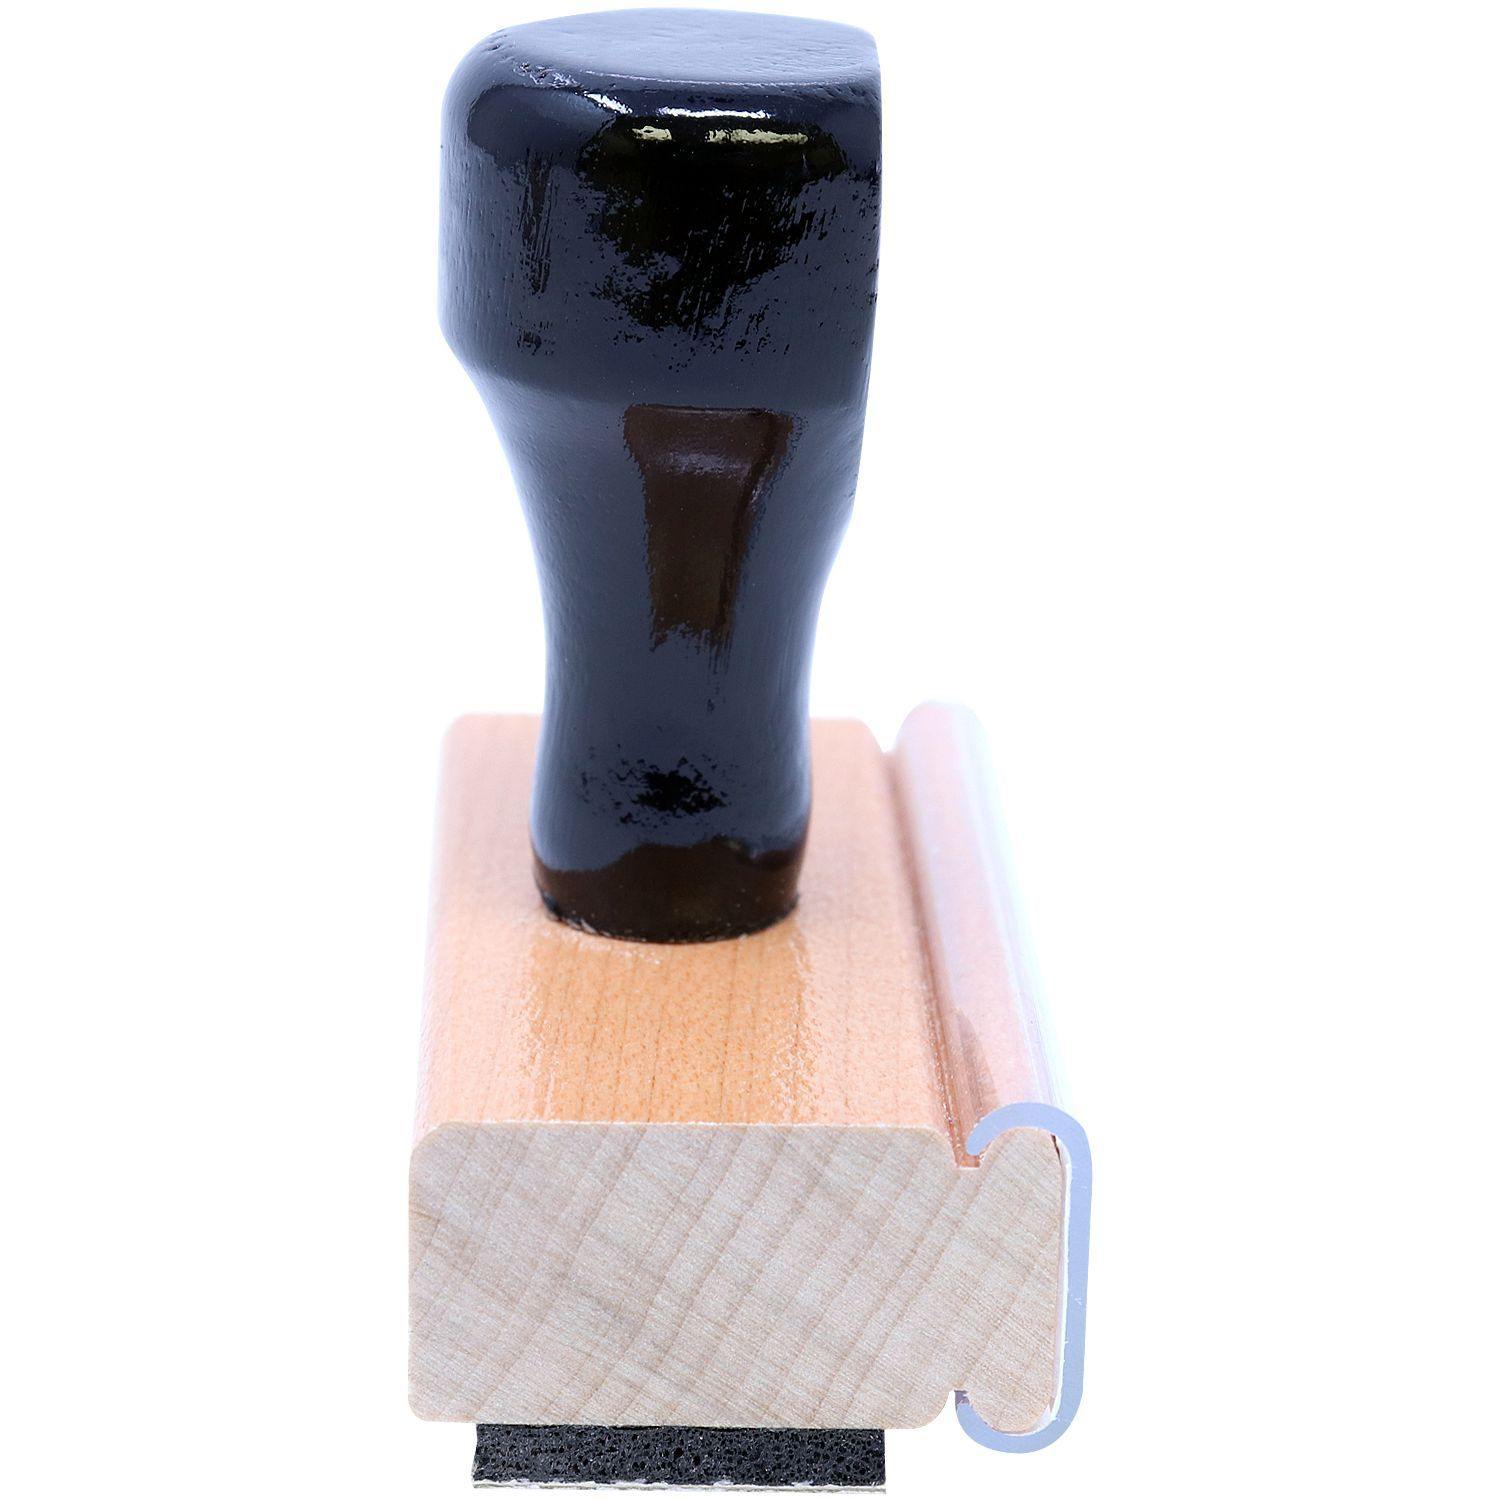 Large Unclaimed Rubber Stamp - Engineer Seal Stamps - Brand_Acorn, Impression Size_Large, Stamp Type_Regular Stamp, Type of Use_General, Type of Use_Office, Type of Use_Postal & Mailing